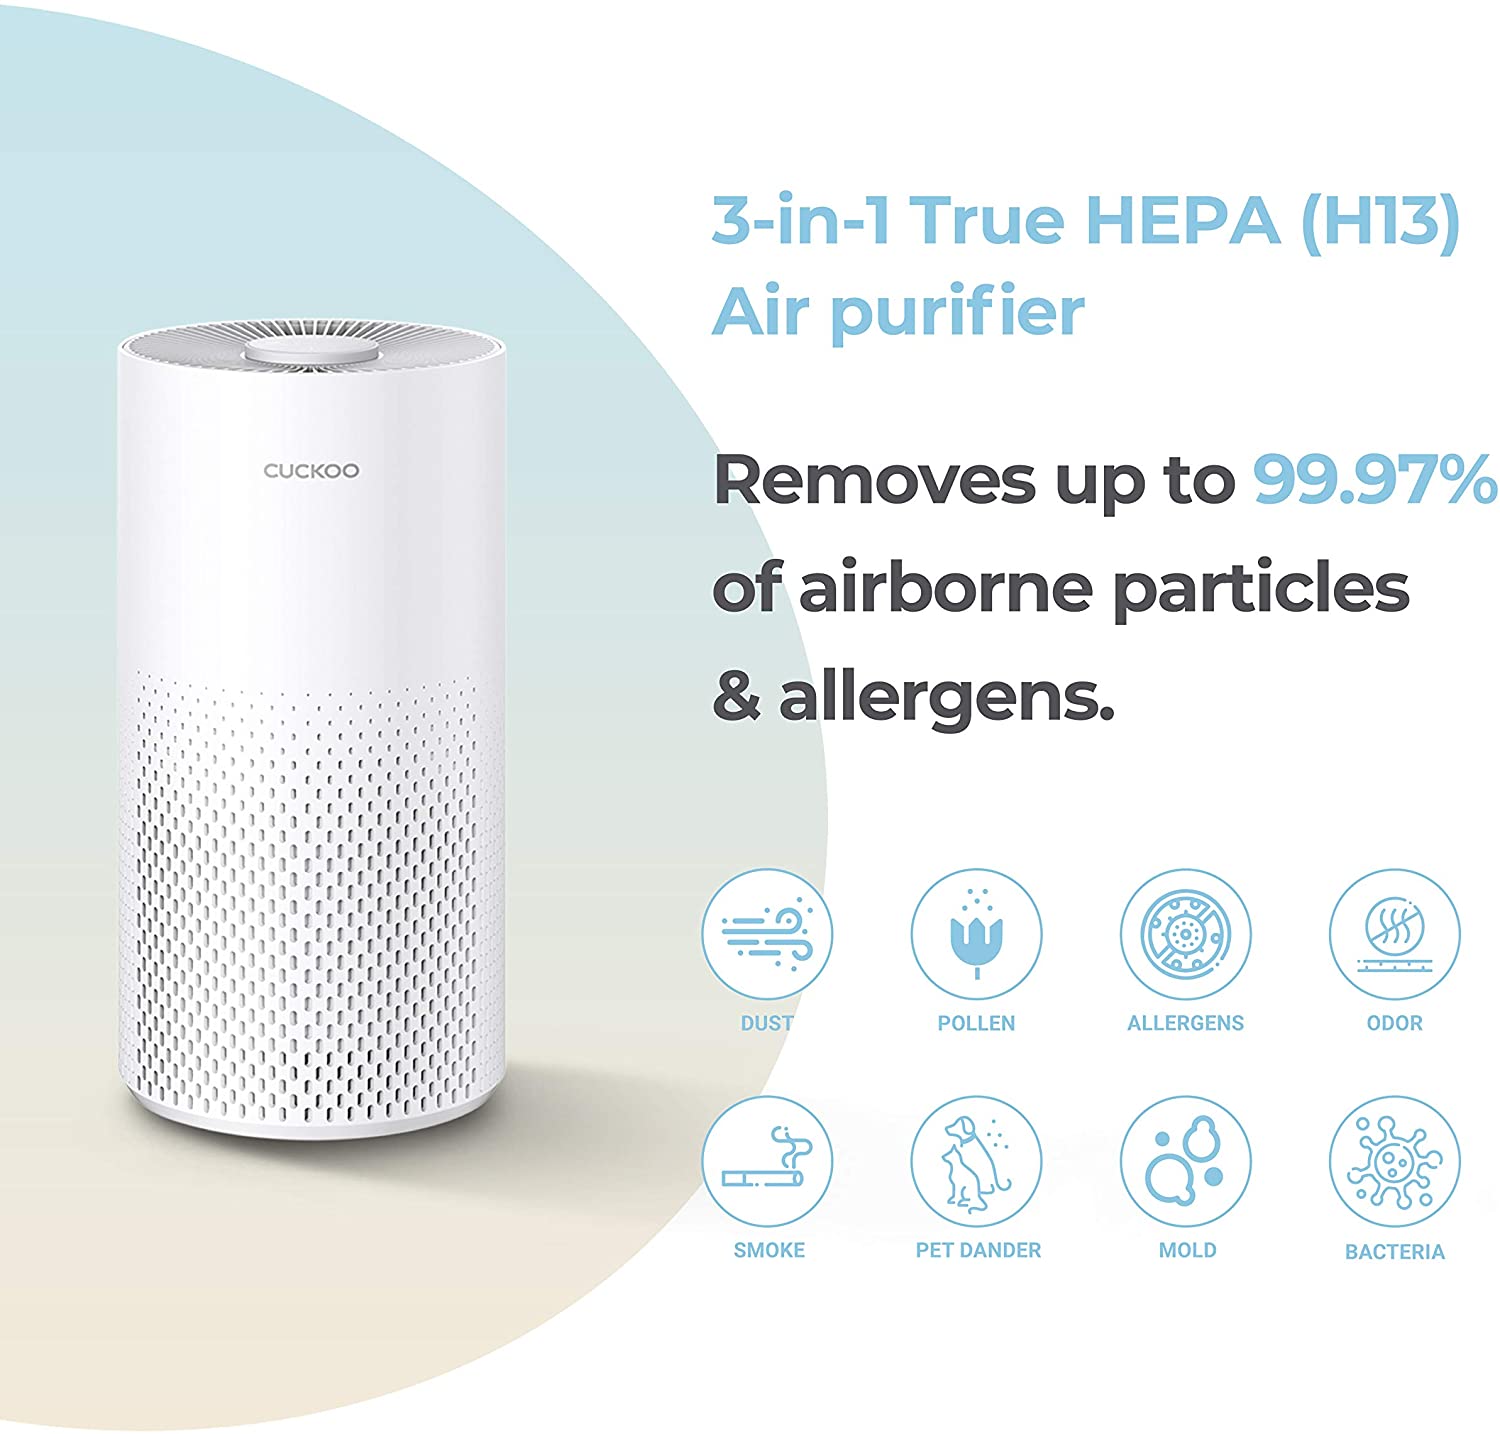 CUCKOO CAC-I0510FW Bundle, 3-Stage Air Purifier with Extra H13 True HEPA Filter, Removes Airborne Particles, For Small Rooms, White - image 2 of 11